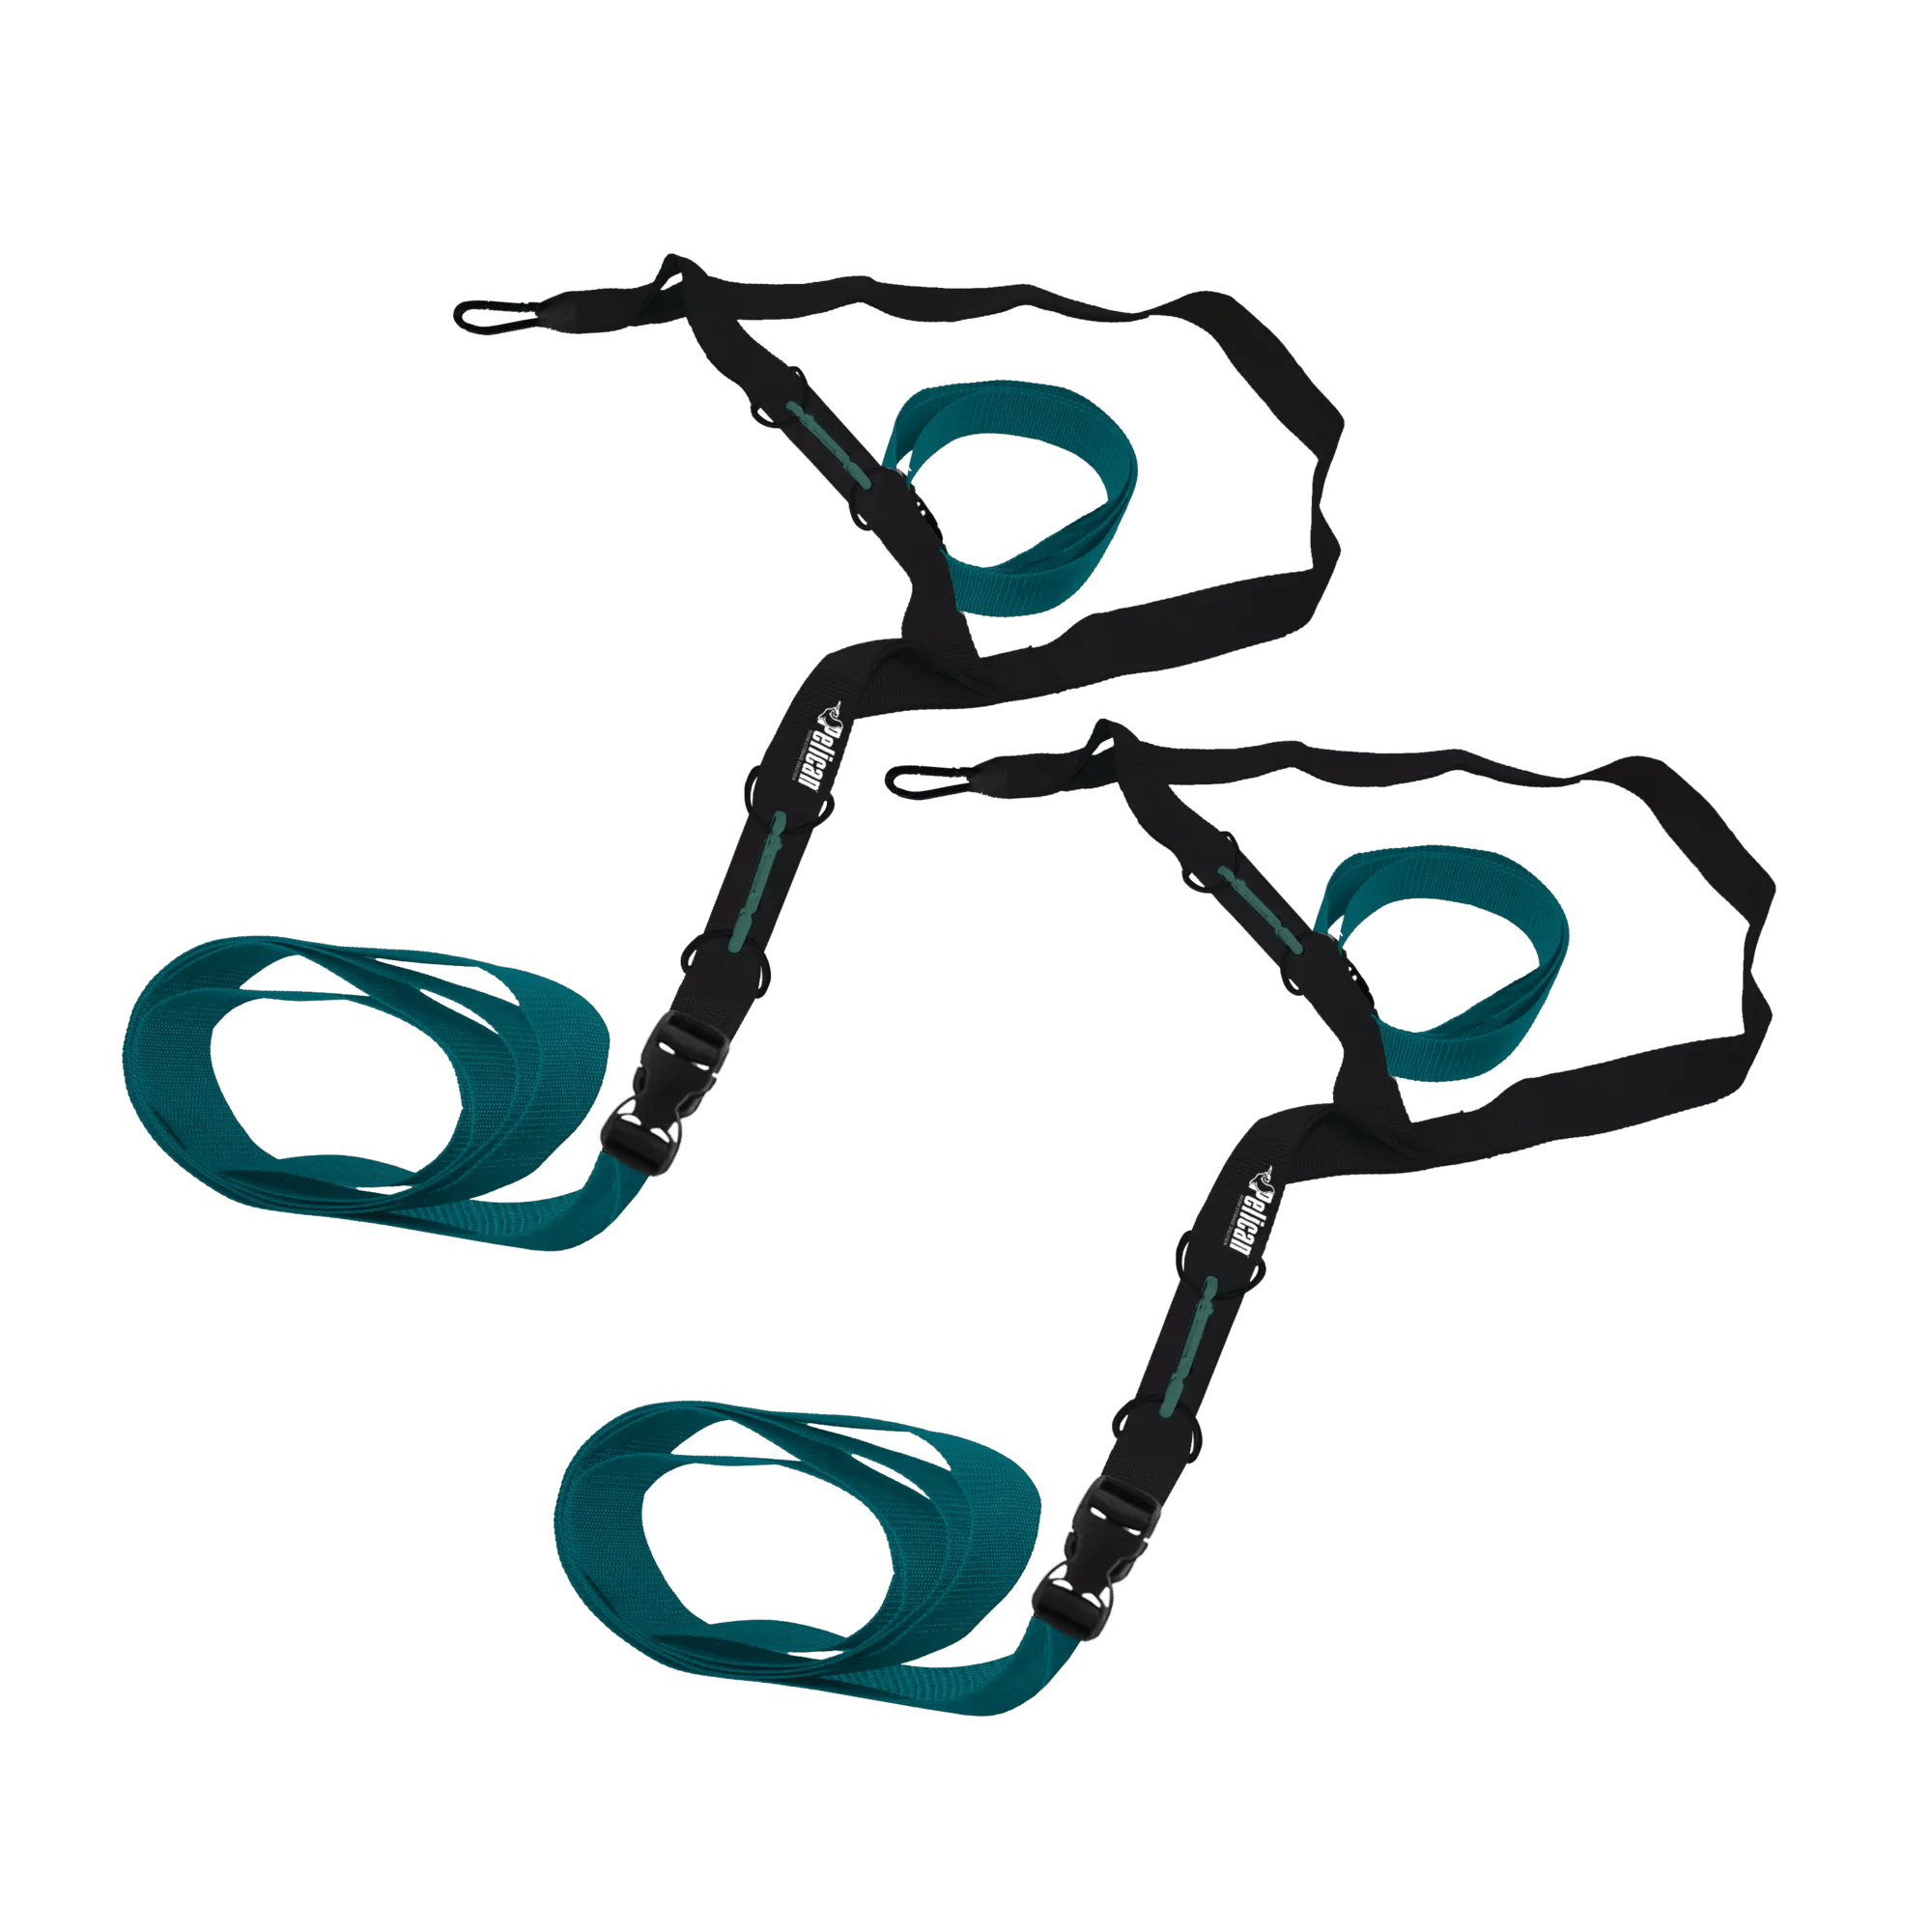 PELICAN - Kayak and SUP Storage Straps - Black - PS1954-00 - ISO